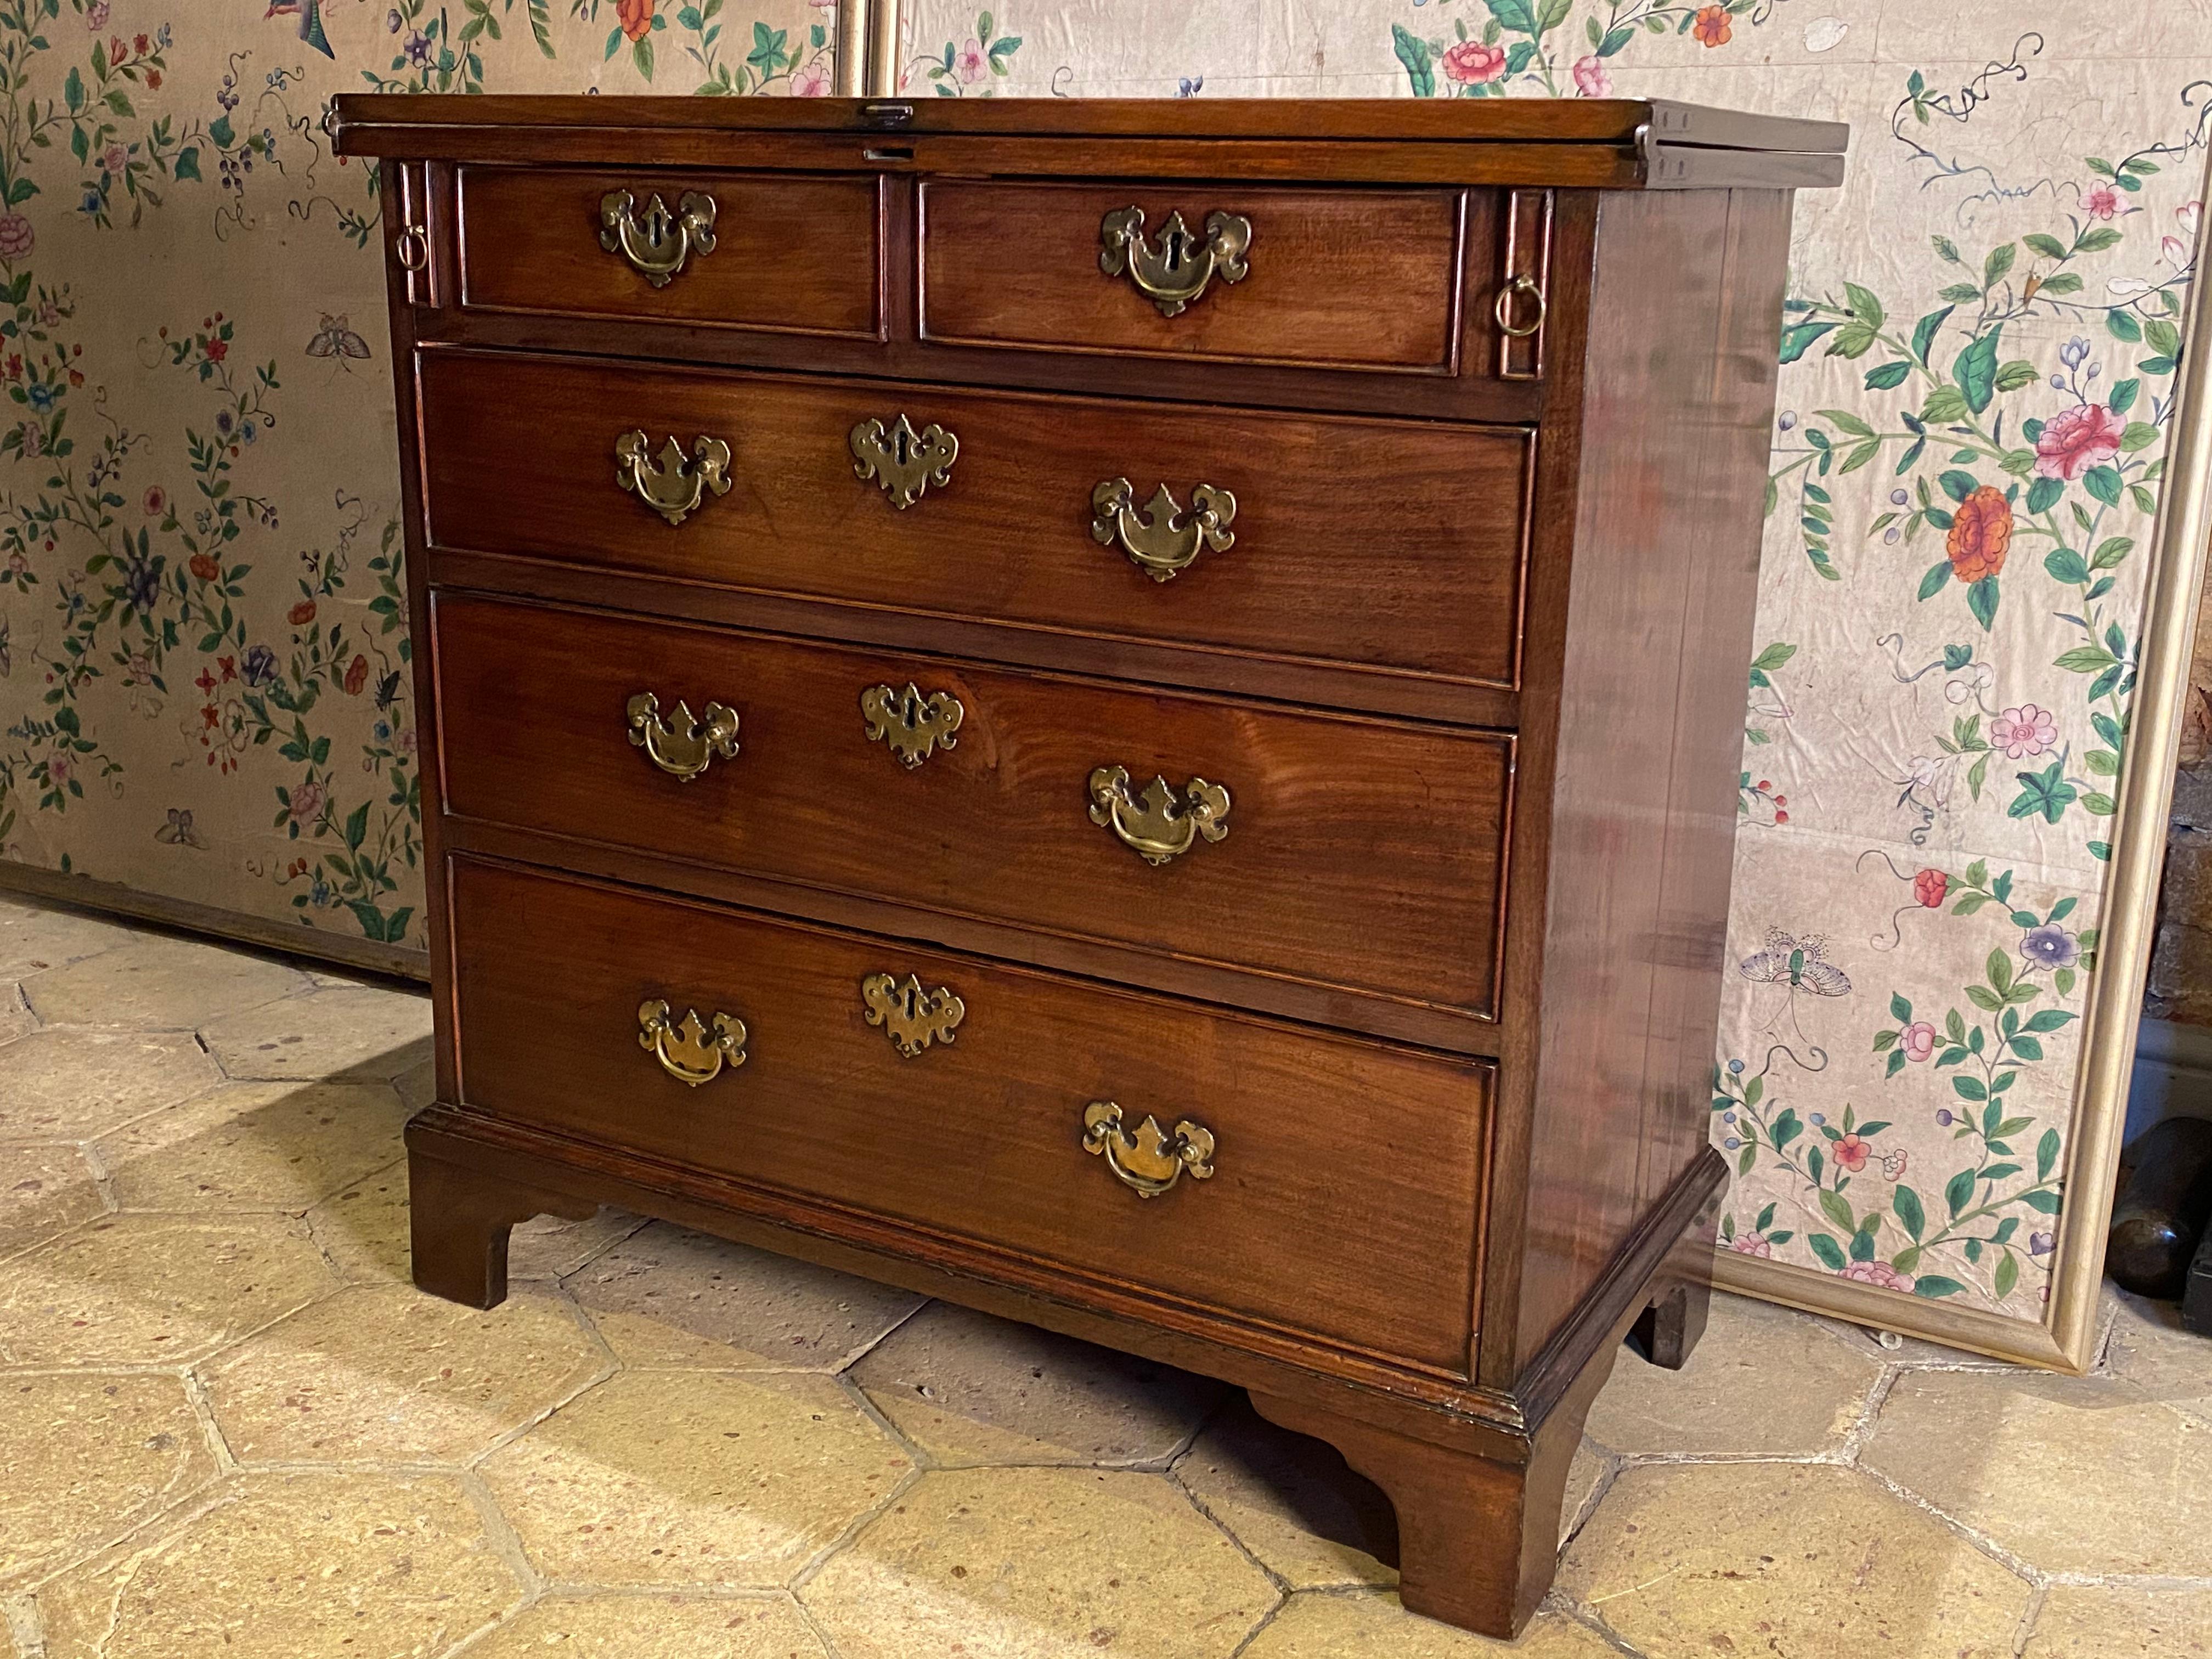 A small English George II period mahogany fold-over top bachelor's chest, circa 1750.
Of good rich color and old patination.

This small Georgian - mid 18th century - bachelor’s chest is in solid mahogany.
With two short and three long drawers.